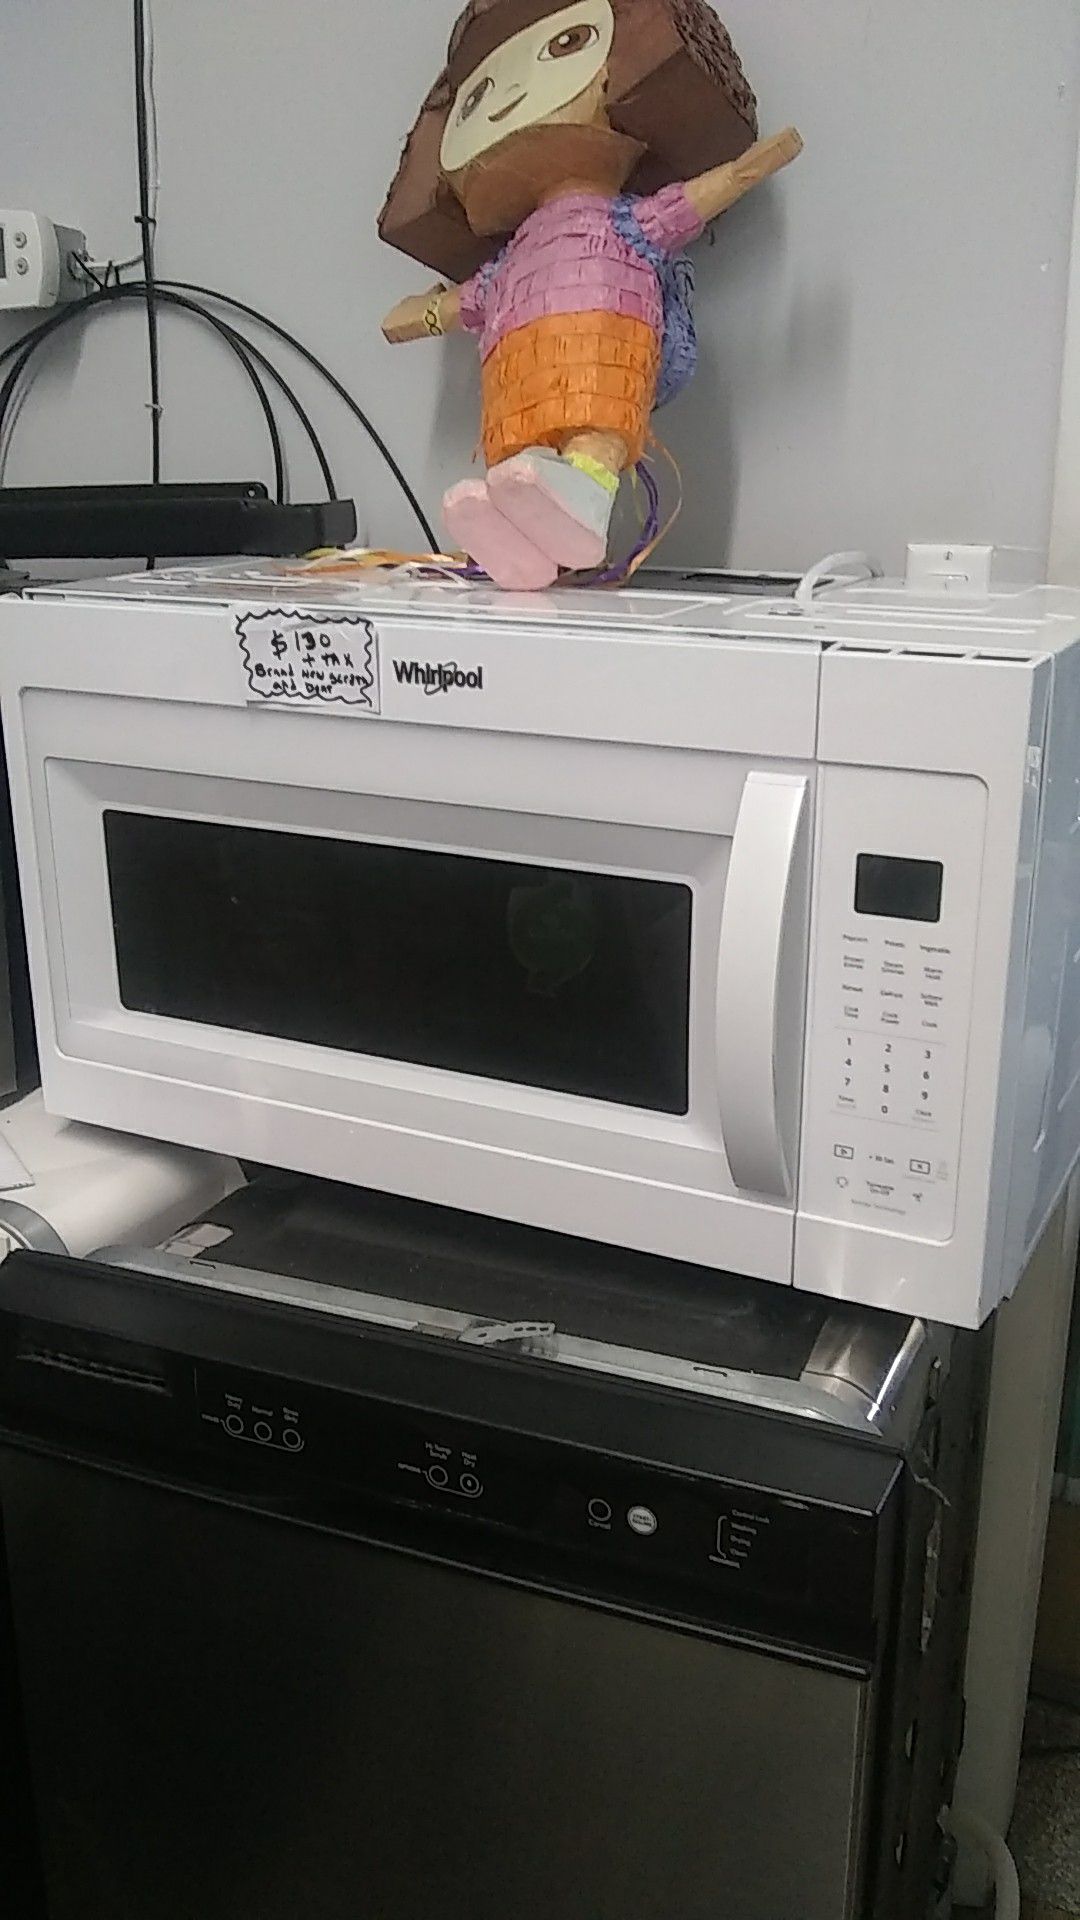 Whirlpool microwave oven brand new scratches and dents